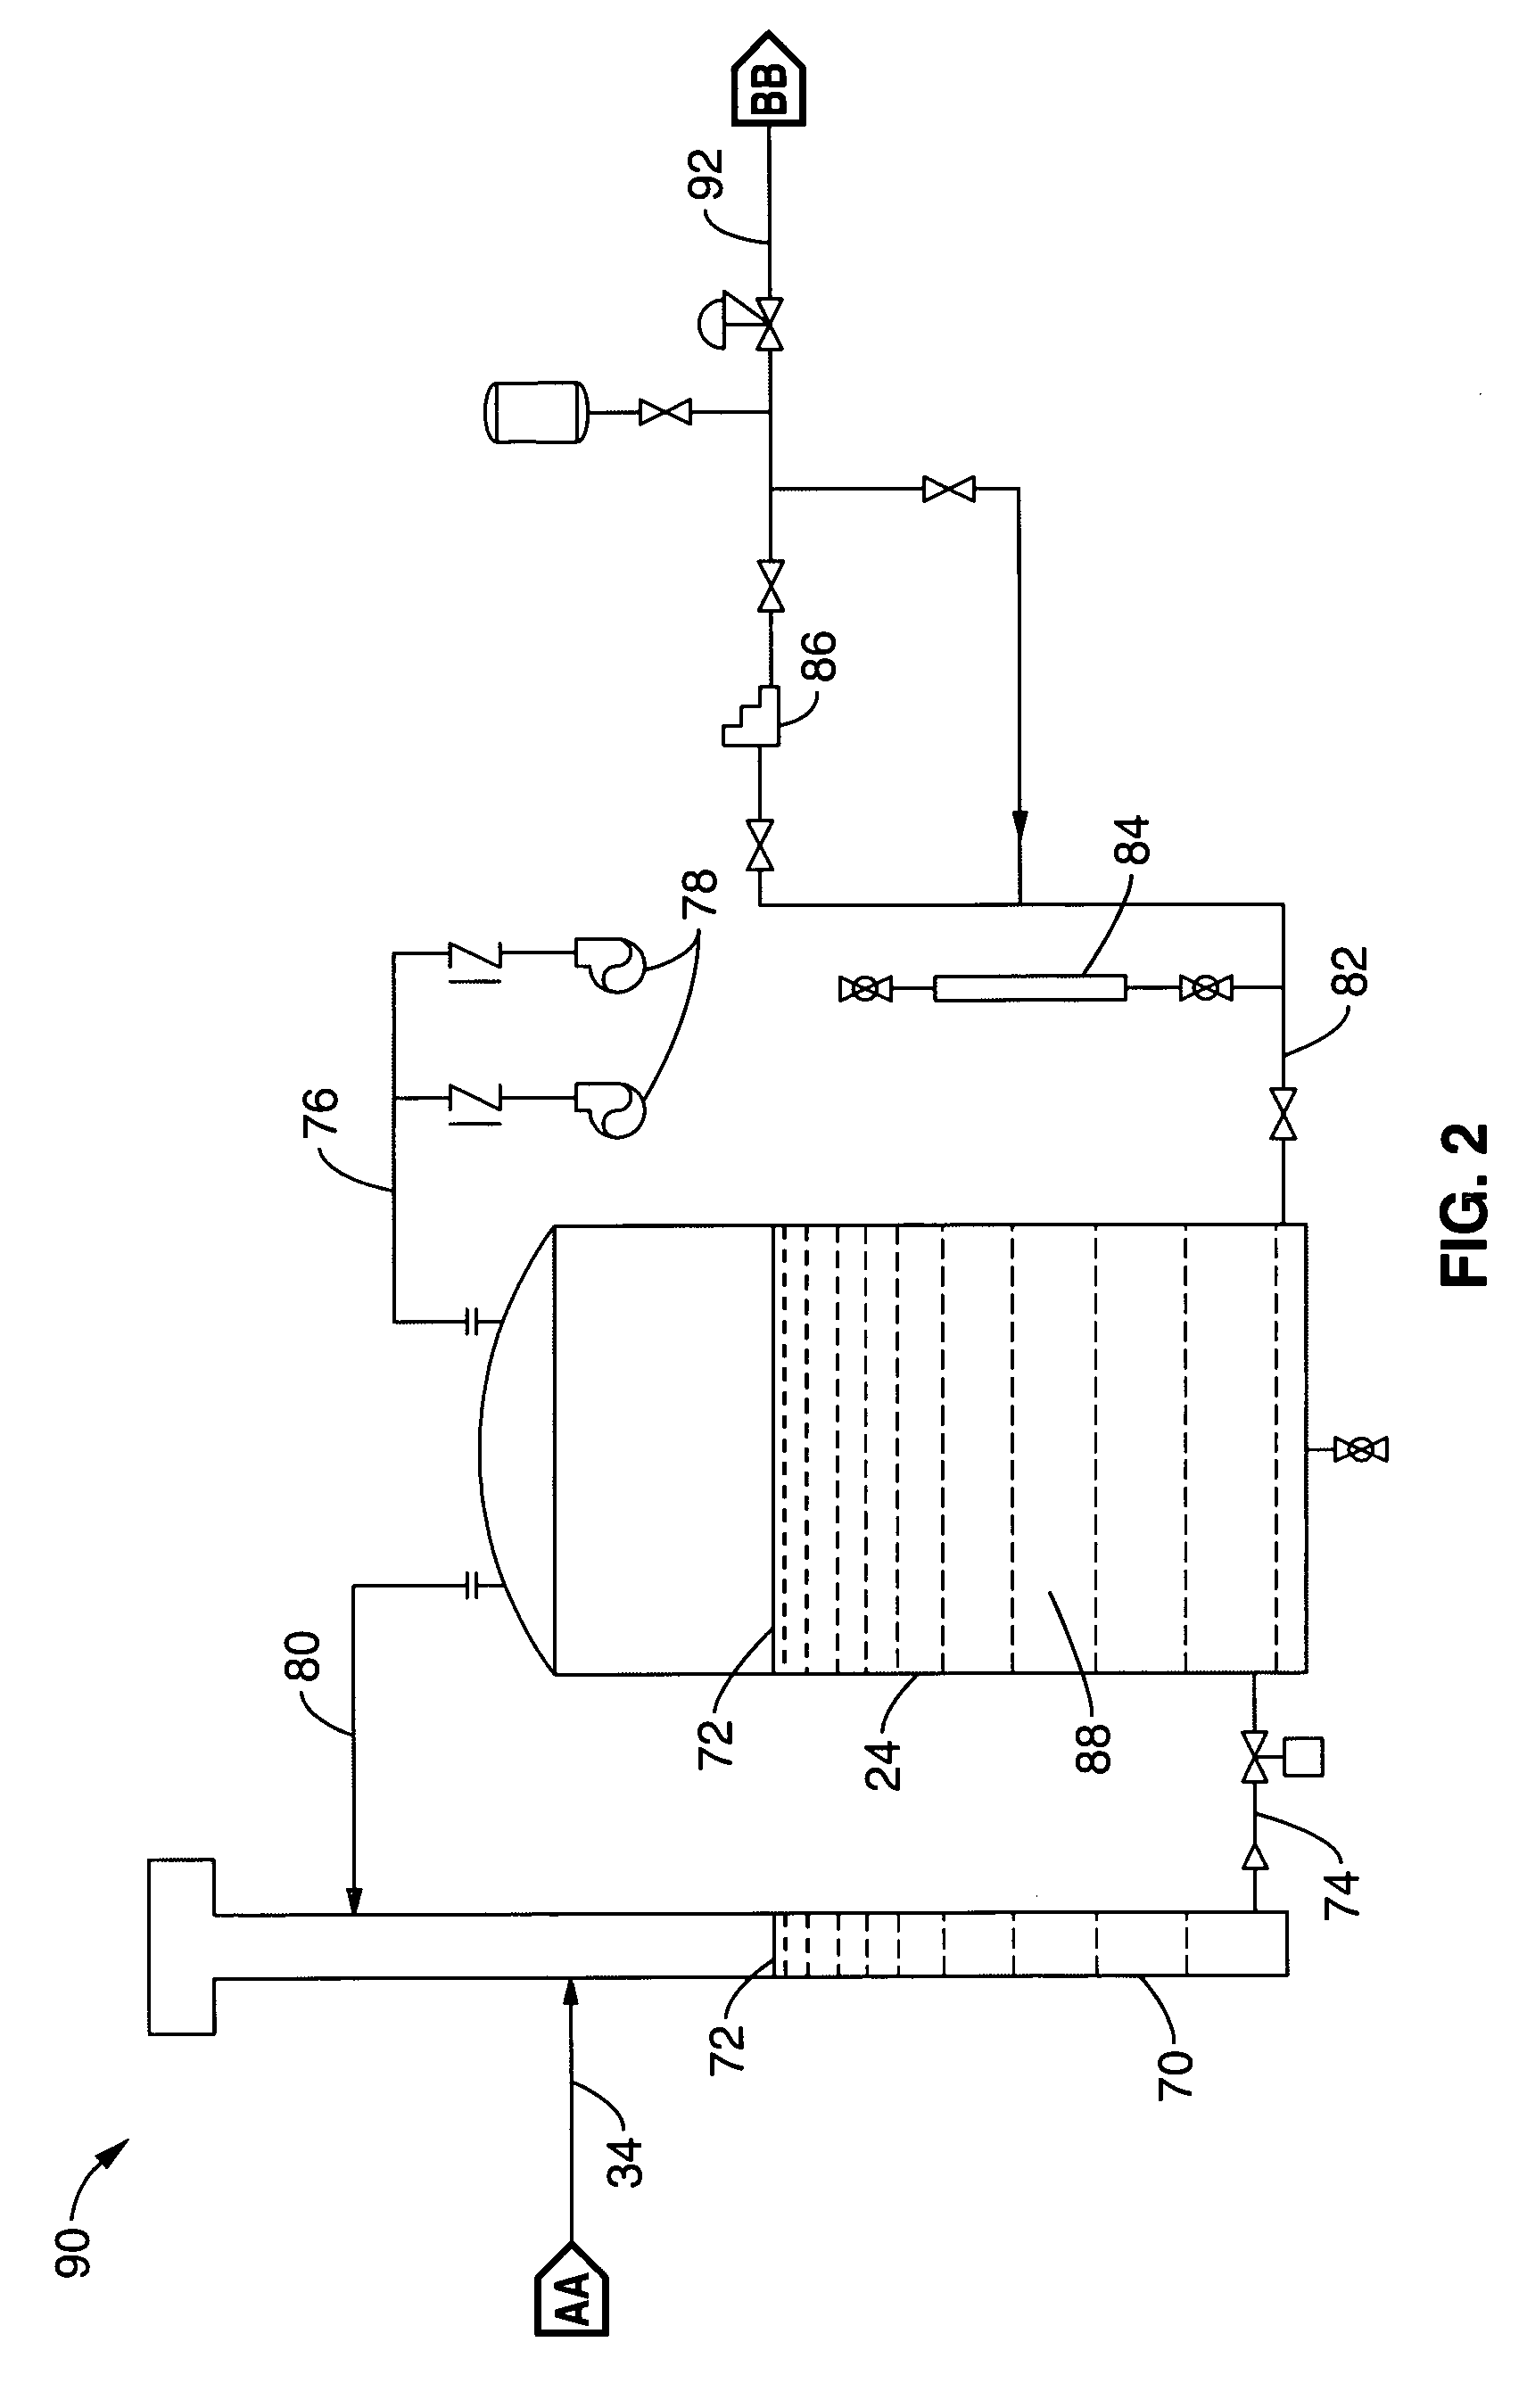 Electrolytic cell and system for treating water